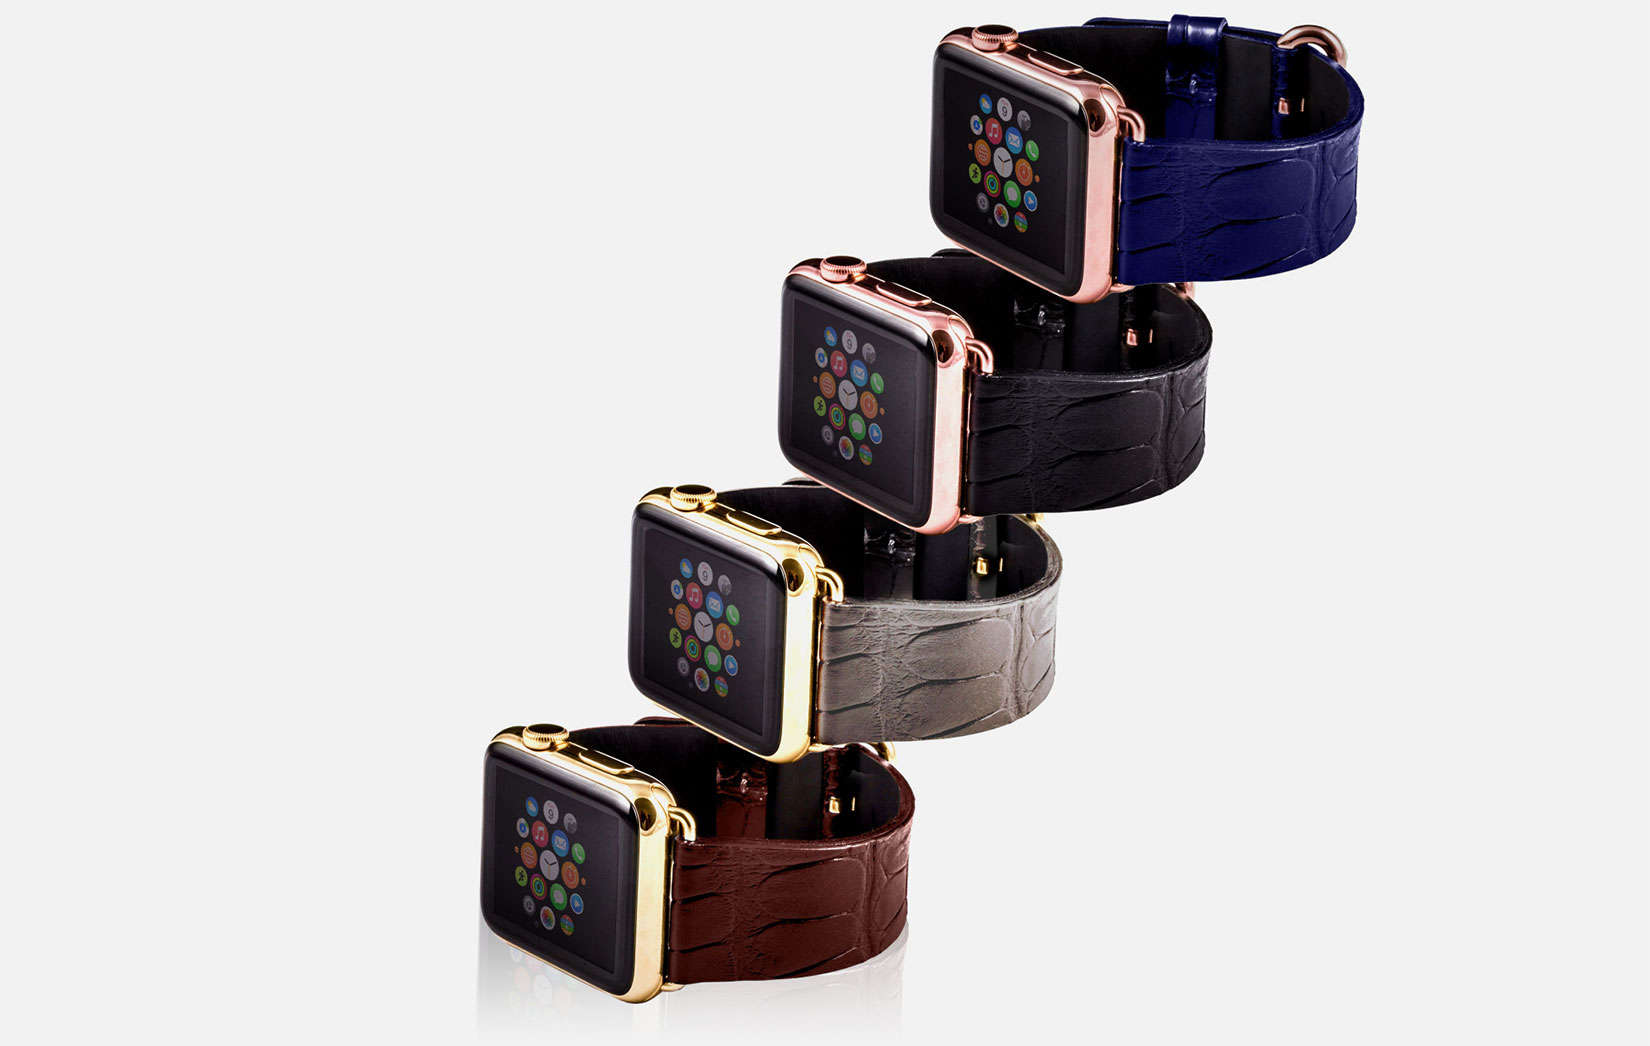 Prime American alligators have some skin in the Apple Watch accessories game.